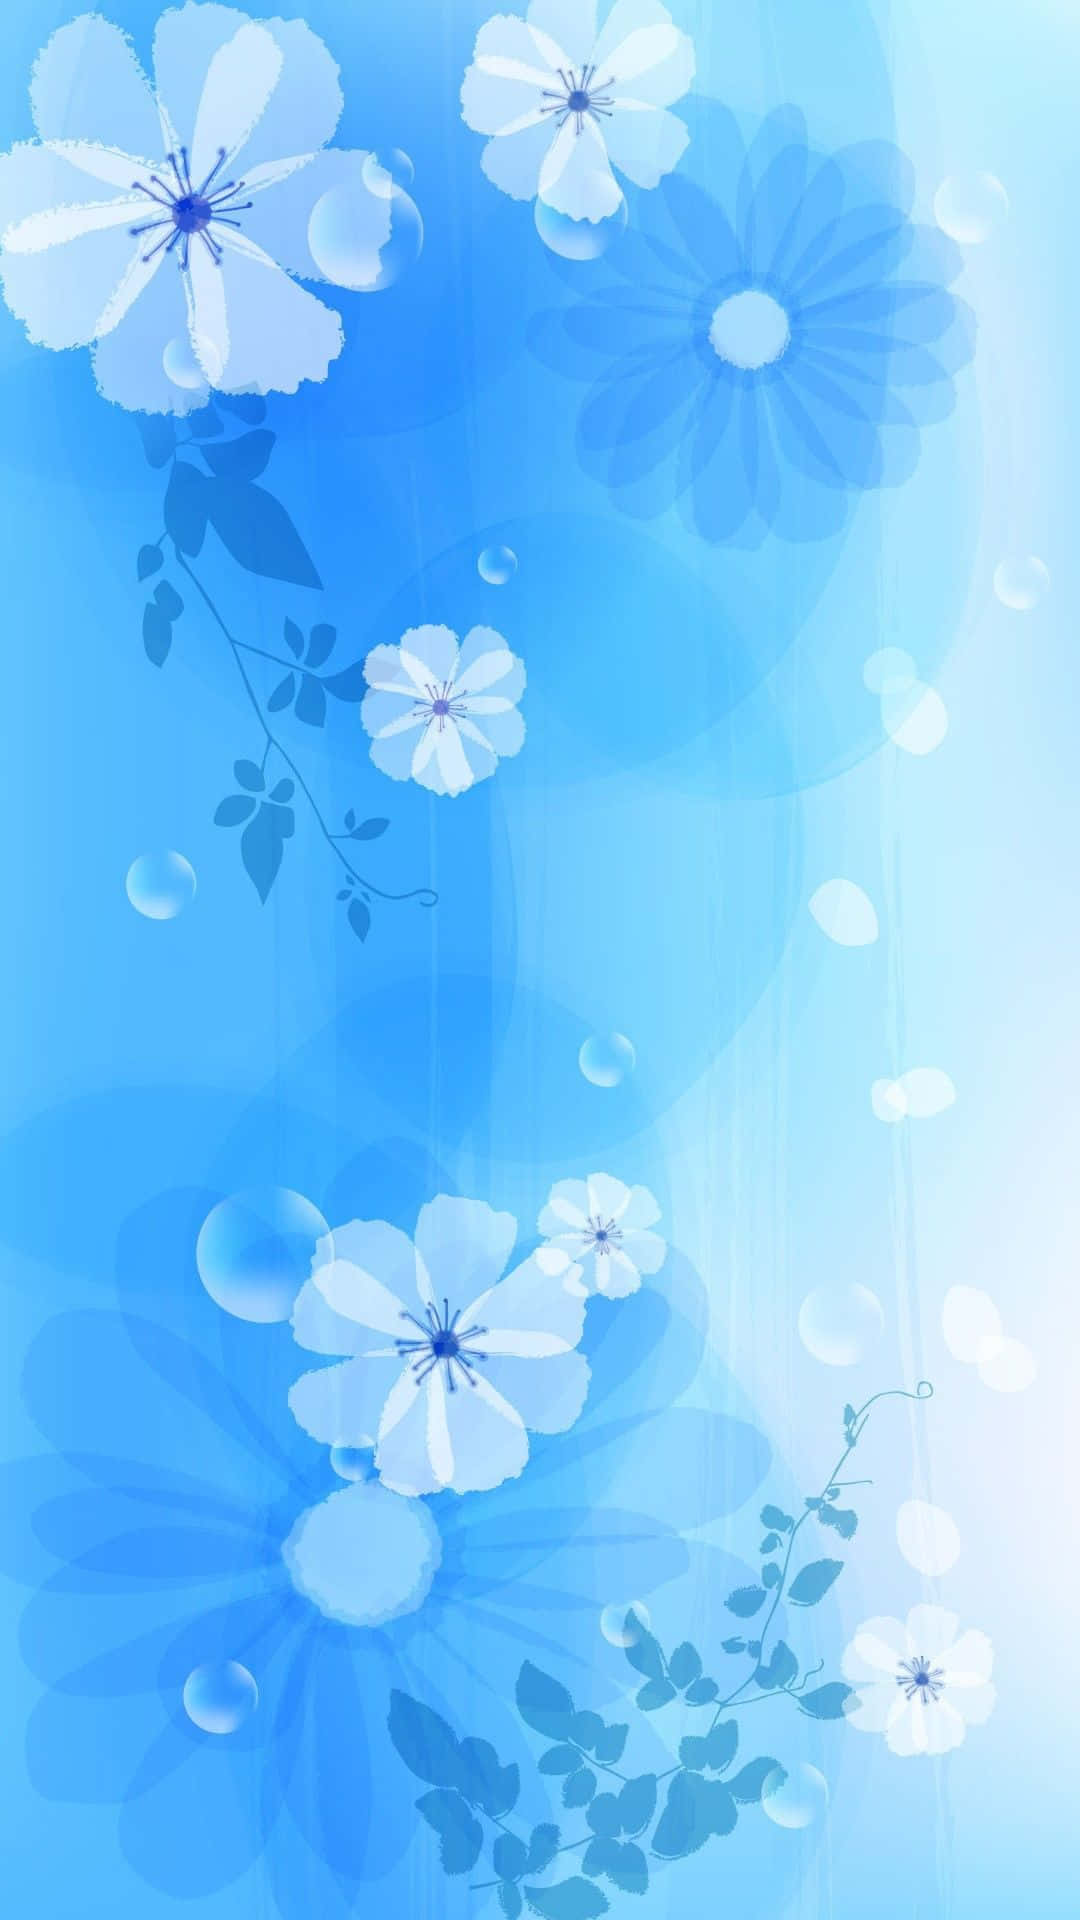 Stay cool iPhone wallpaper  Wallpaper iphone summer, Cute blue wallpaper,  Cute backgrounds for iphone